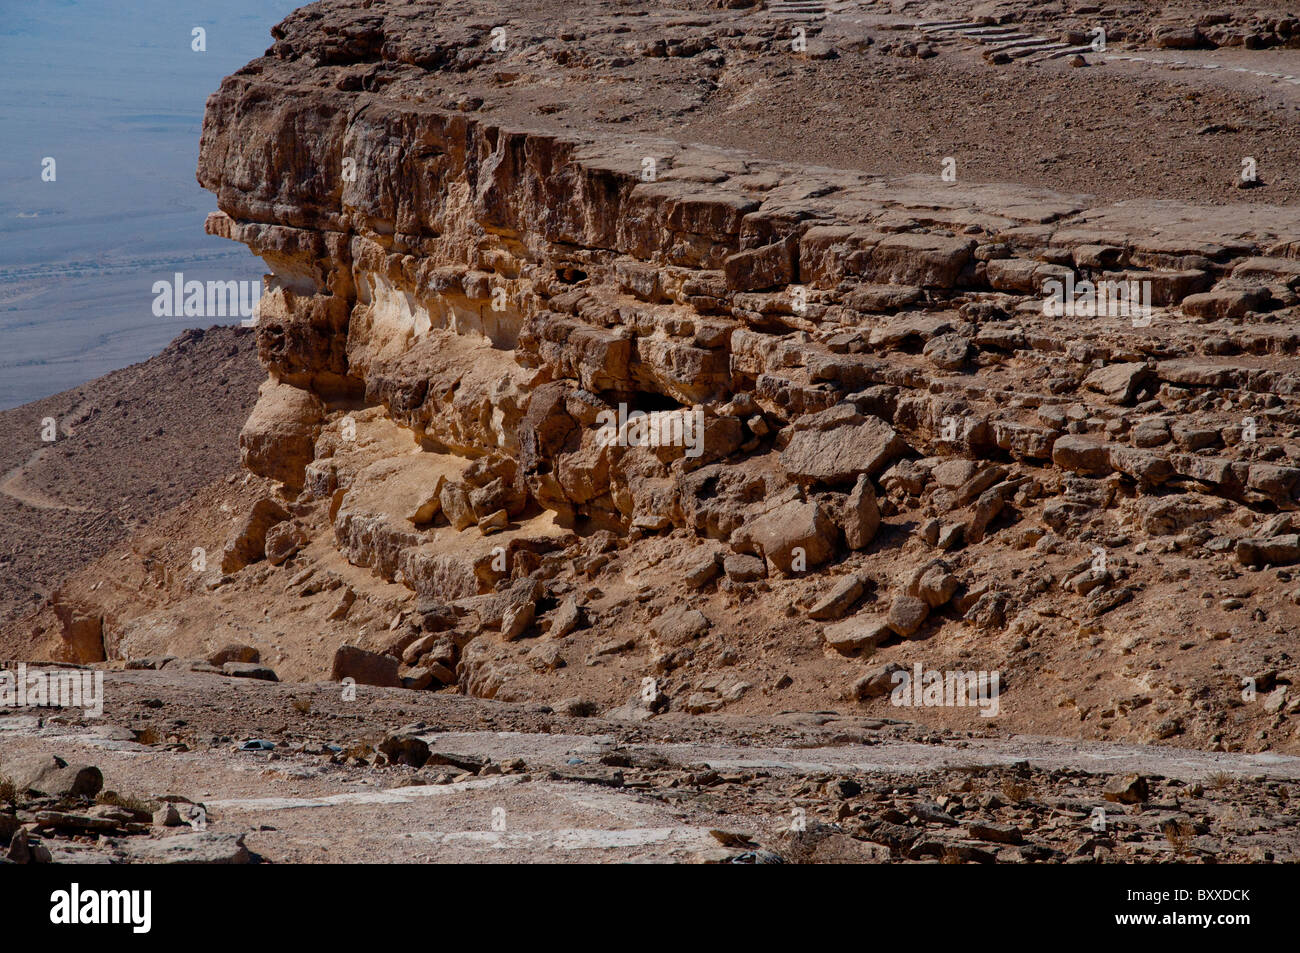 A view of the Ramon Crater. Stock Photo